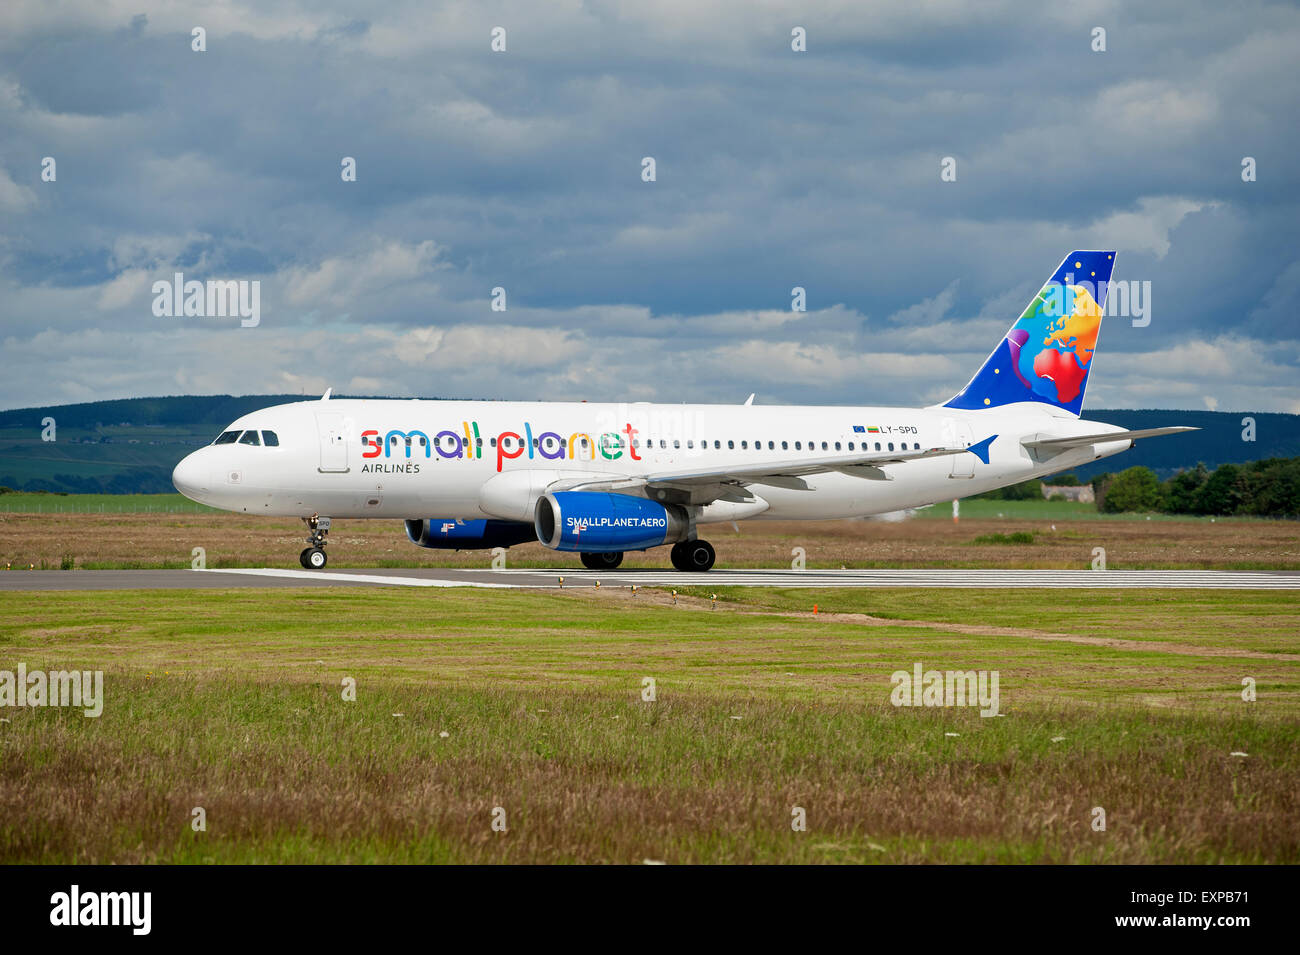 Lithuanian Small Planet Airlines Airbus 320-232 (LY-SPD) at Inverness airport Scotland.SCO 9952. Stock Photo